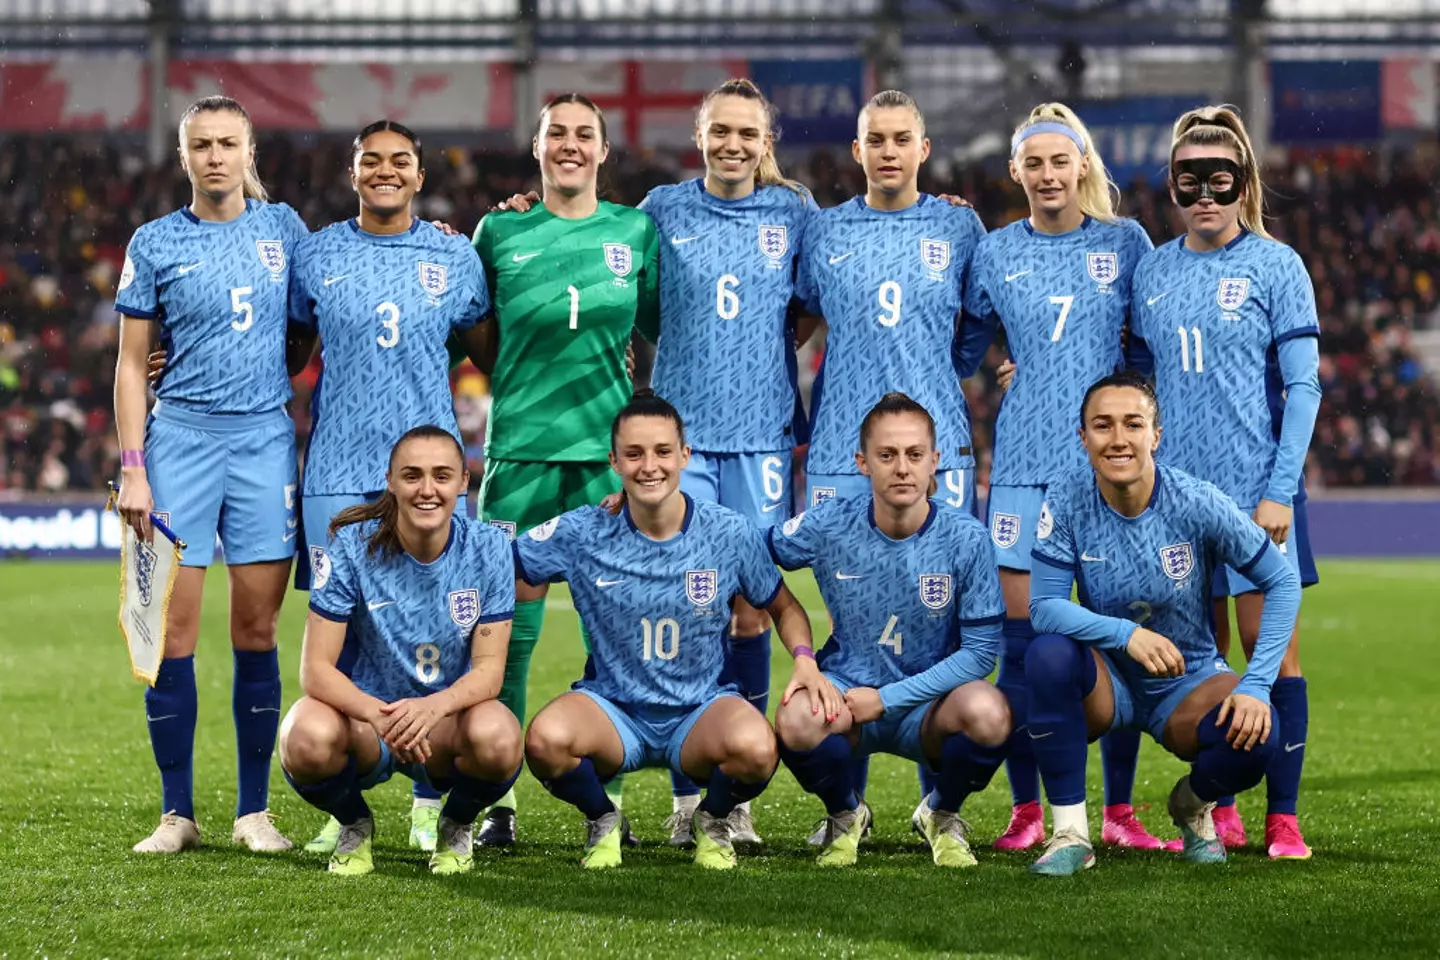 The Lionesses are playing against Spain in the Women's World Cup final.